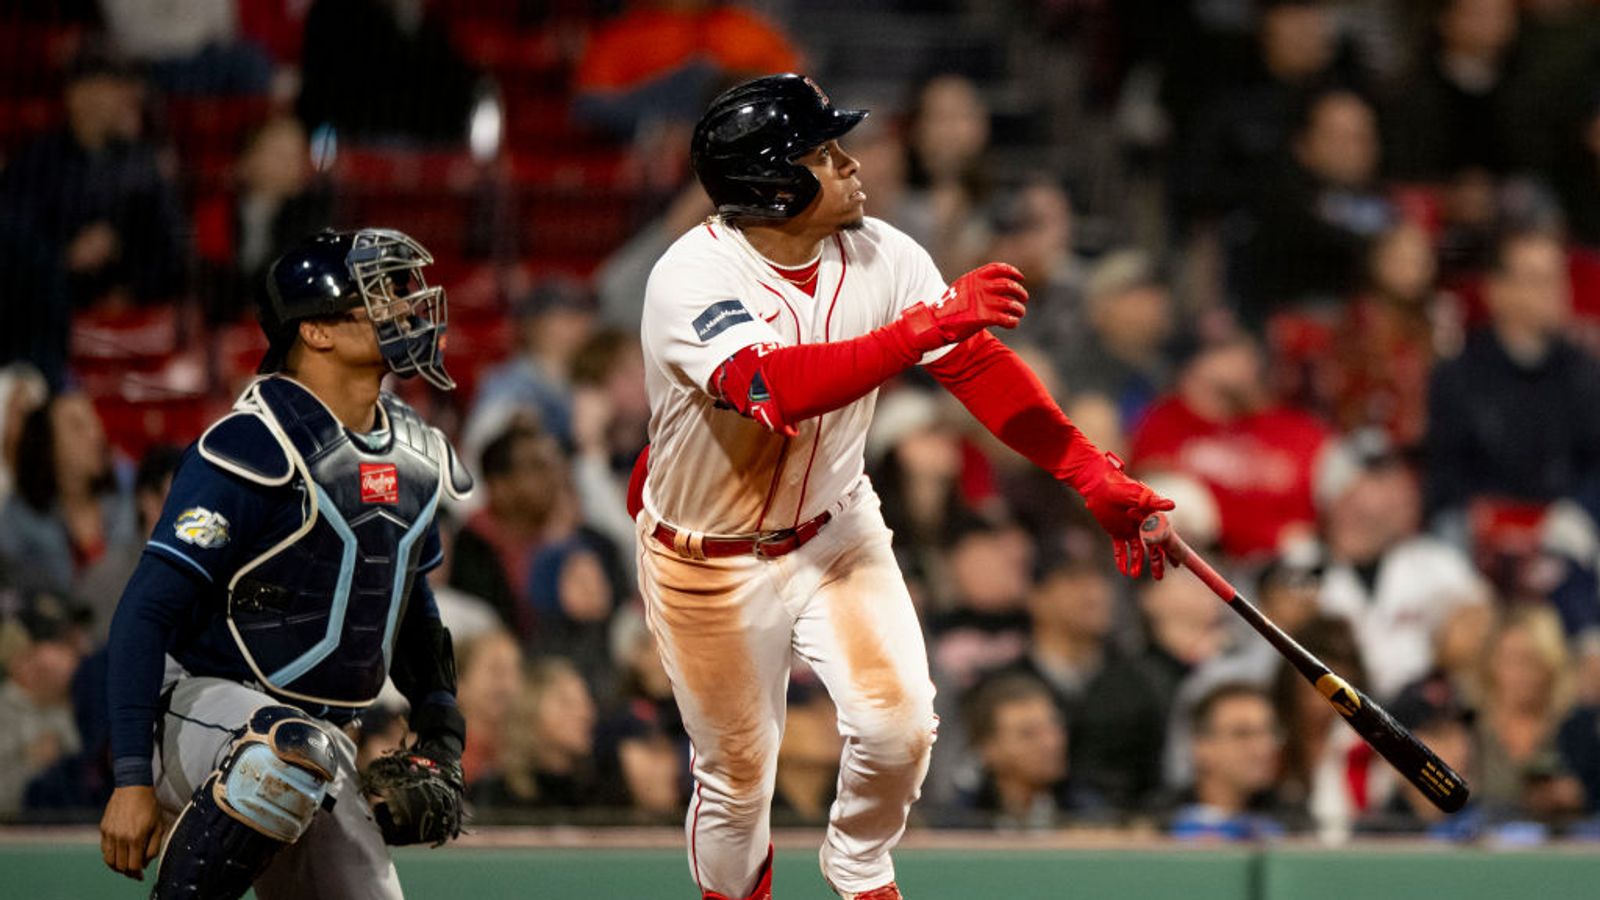 Red Sox: Tanner Houck tagged with second loss in as many starts